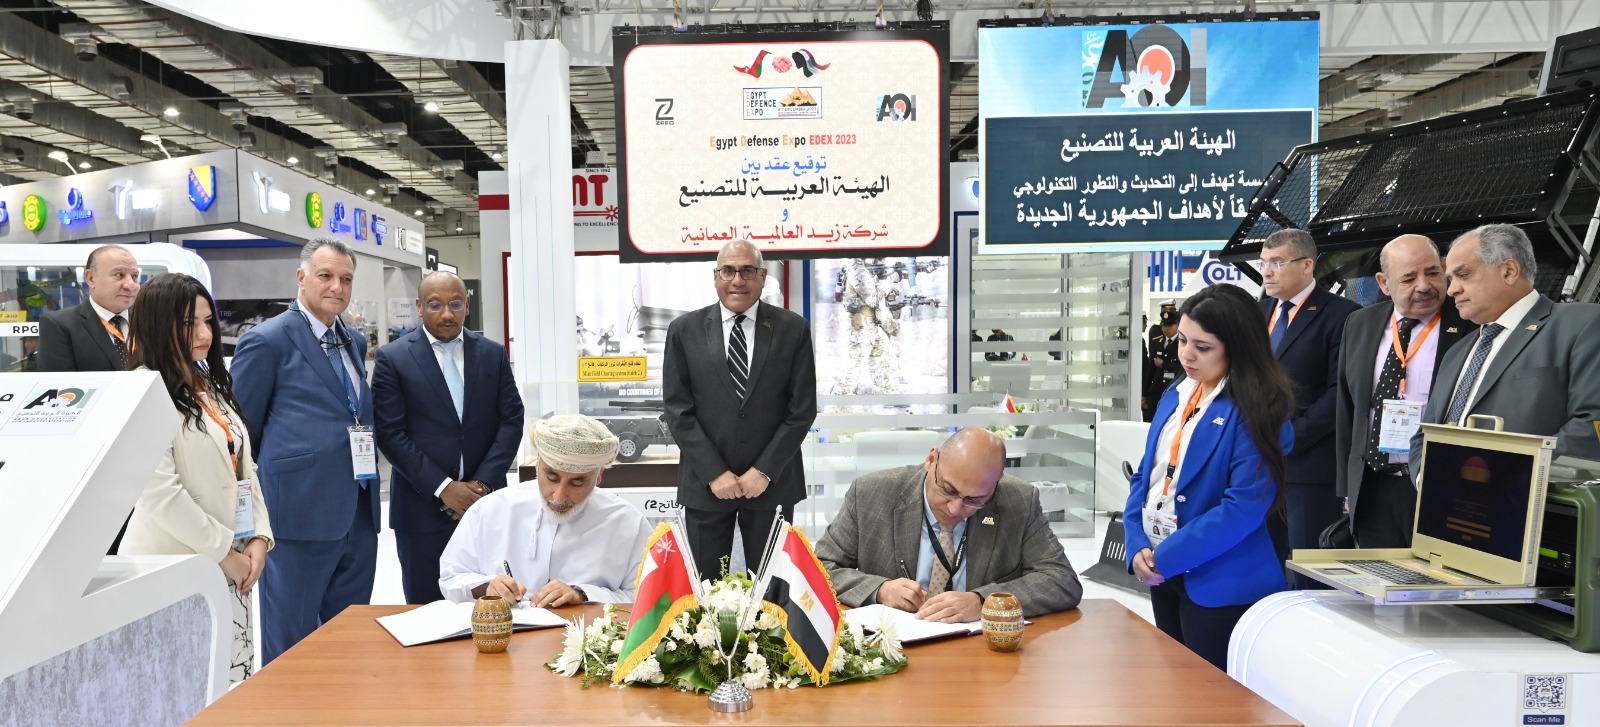 The AOI  strengthens bridges of cooperation with Arab brothers, Signing  a cooperation contract with the Omani Zeed International Company